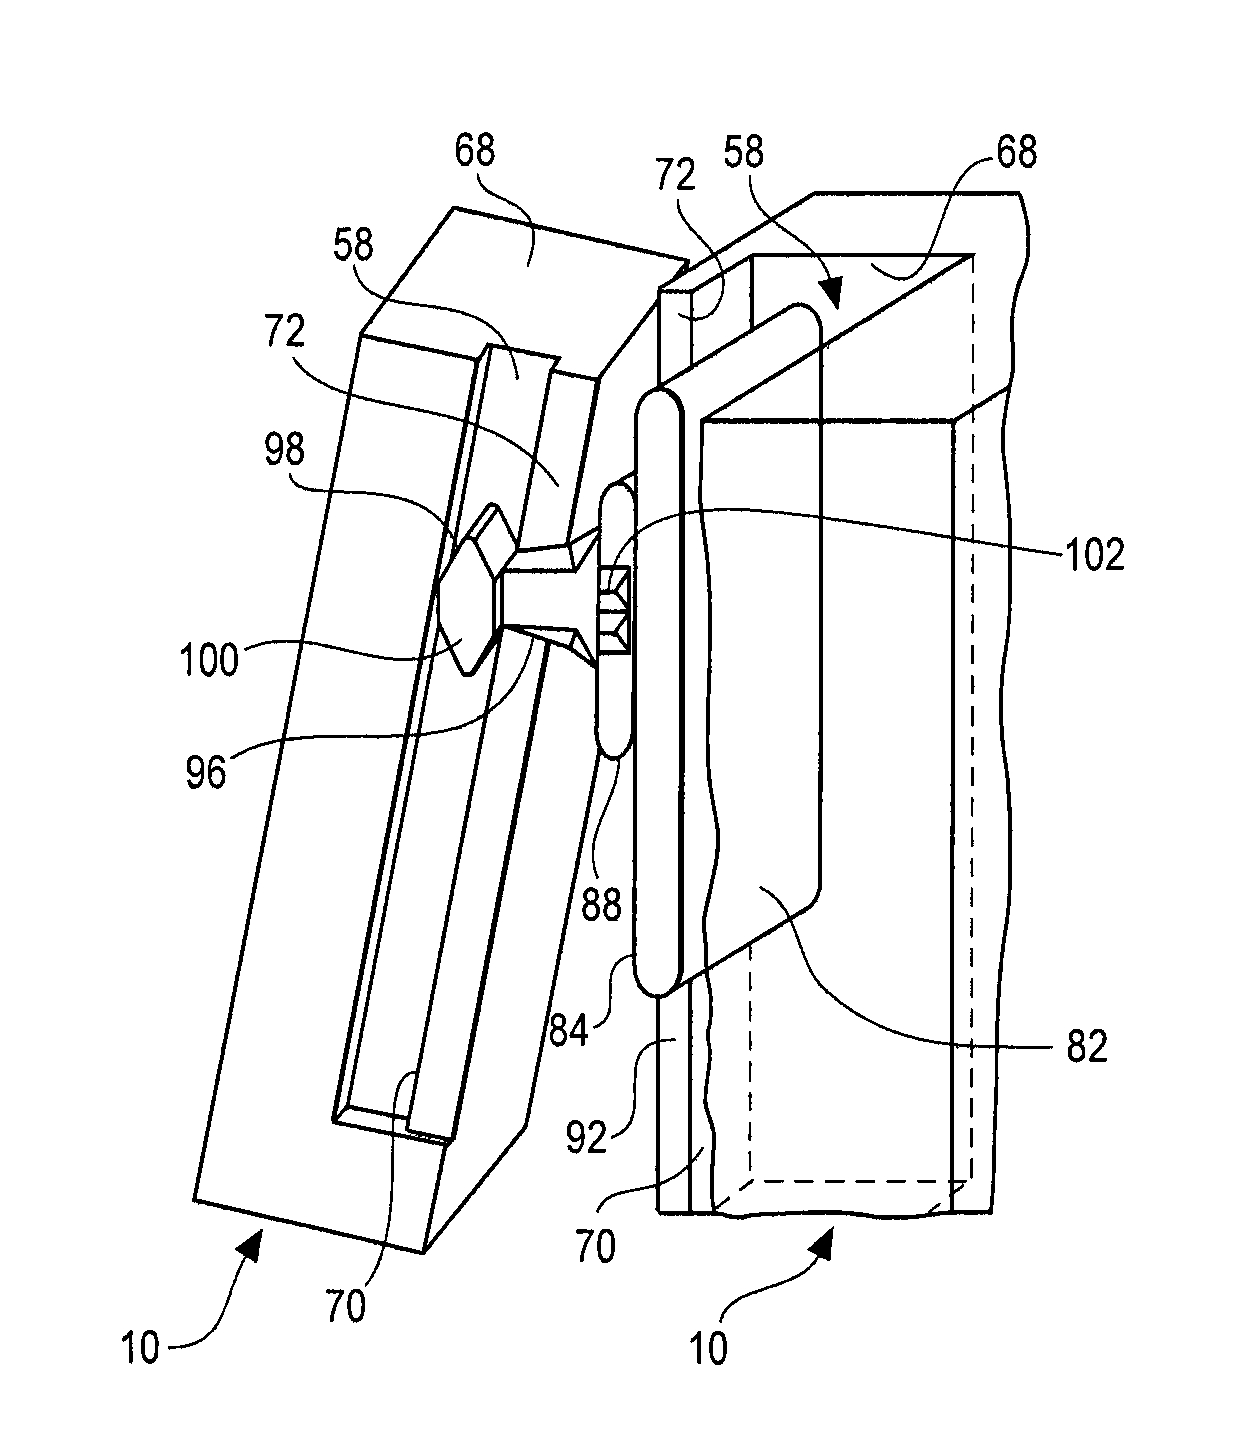 Solar panel support module and method of creating array of interchangeable and substitutable solar panel support modules